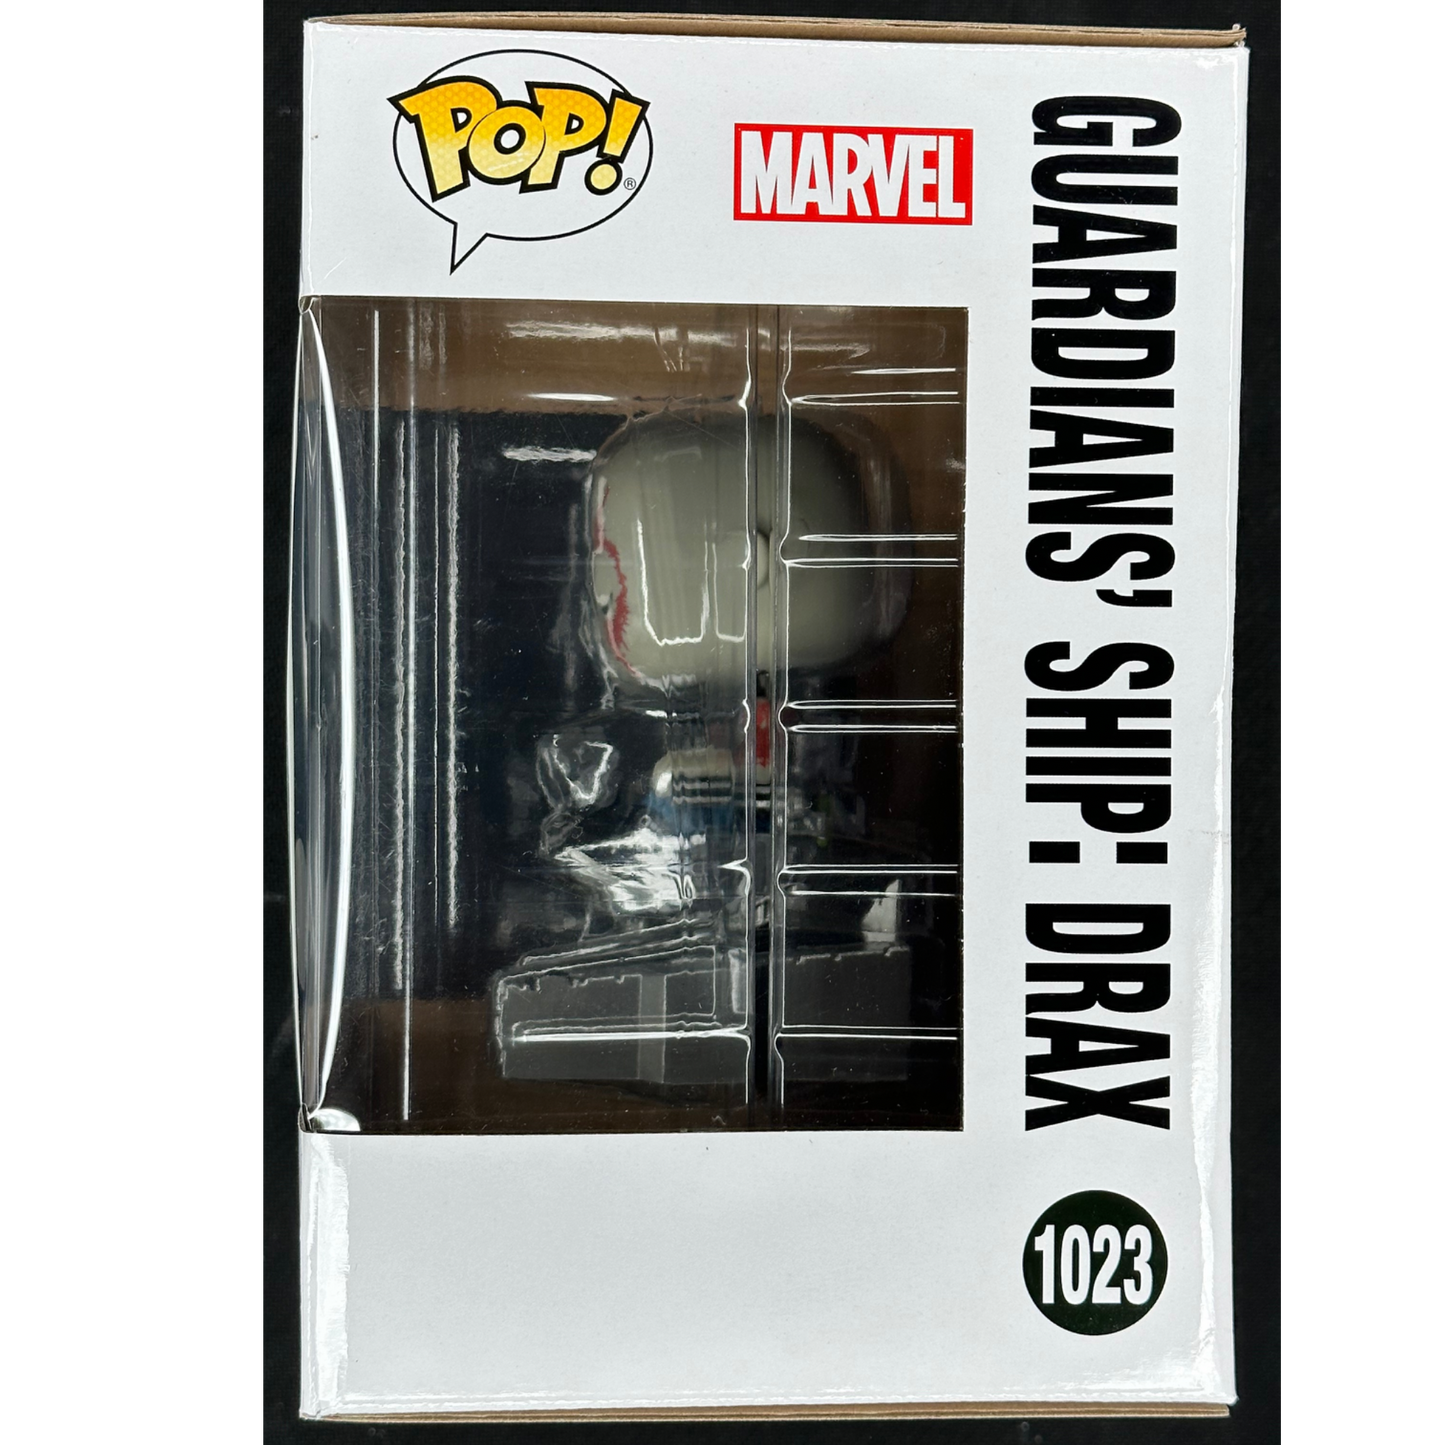 Guardians' Ship: Drax Funko Pop! Avengers Infinity was Special Edition #1023